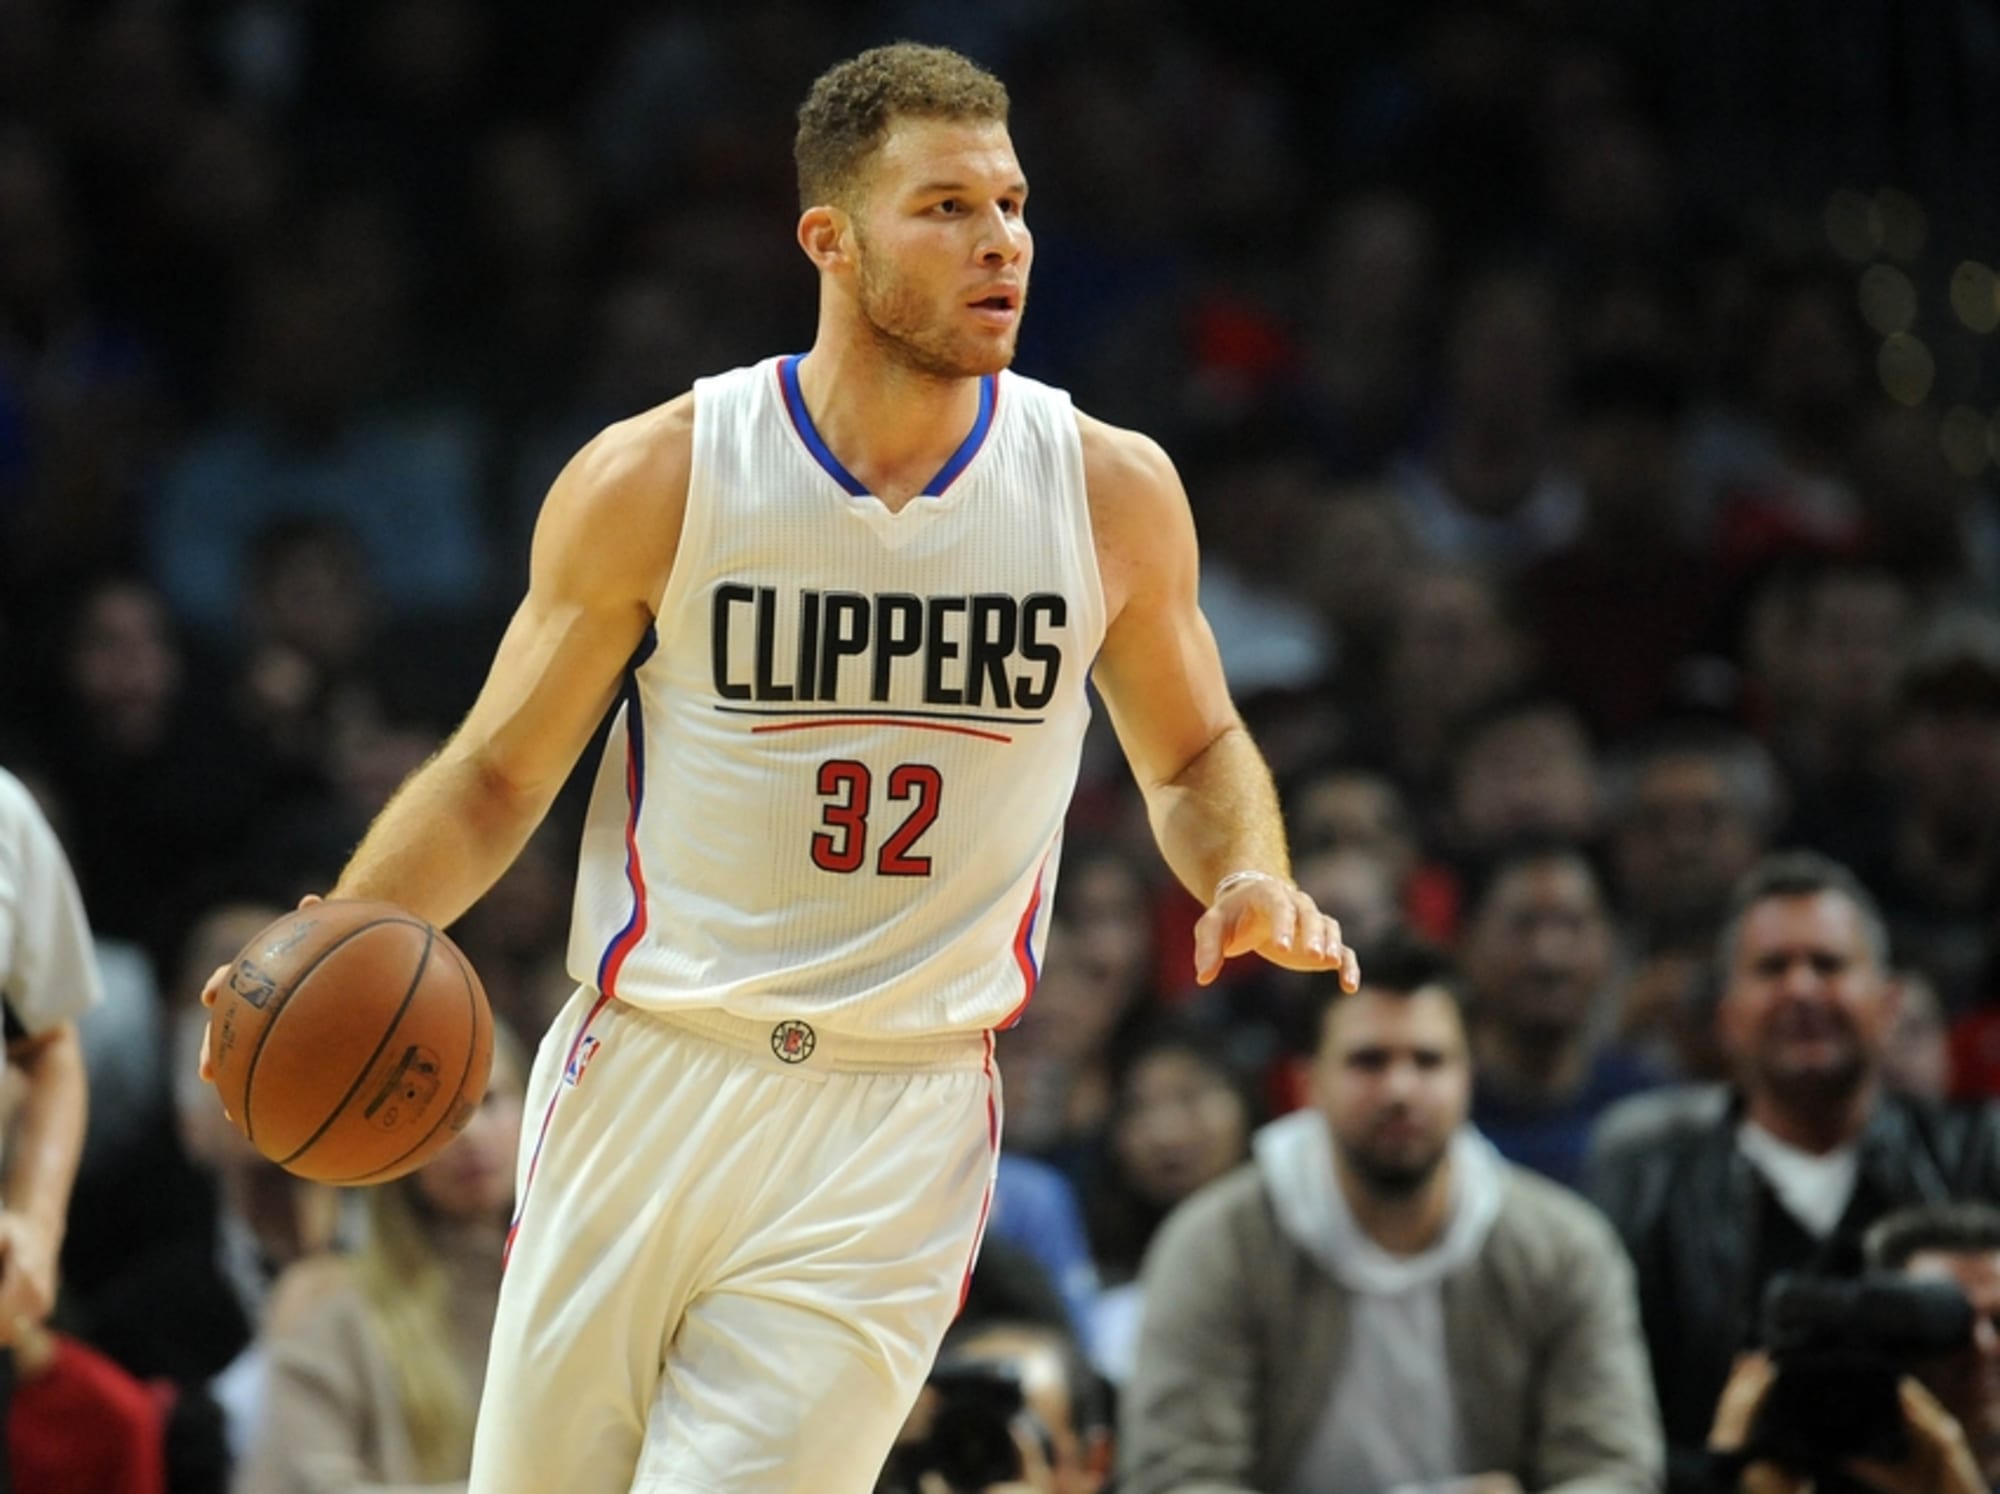 NBA: Blake Griffin improves game to aid Clippers